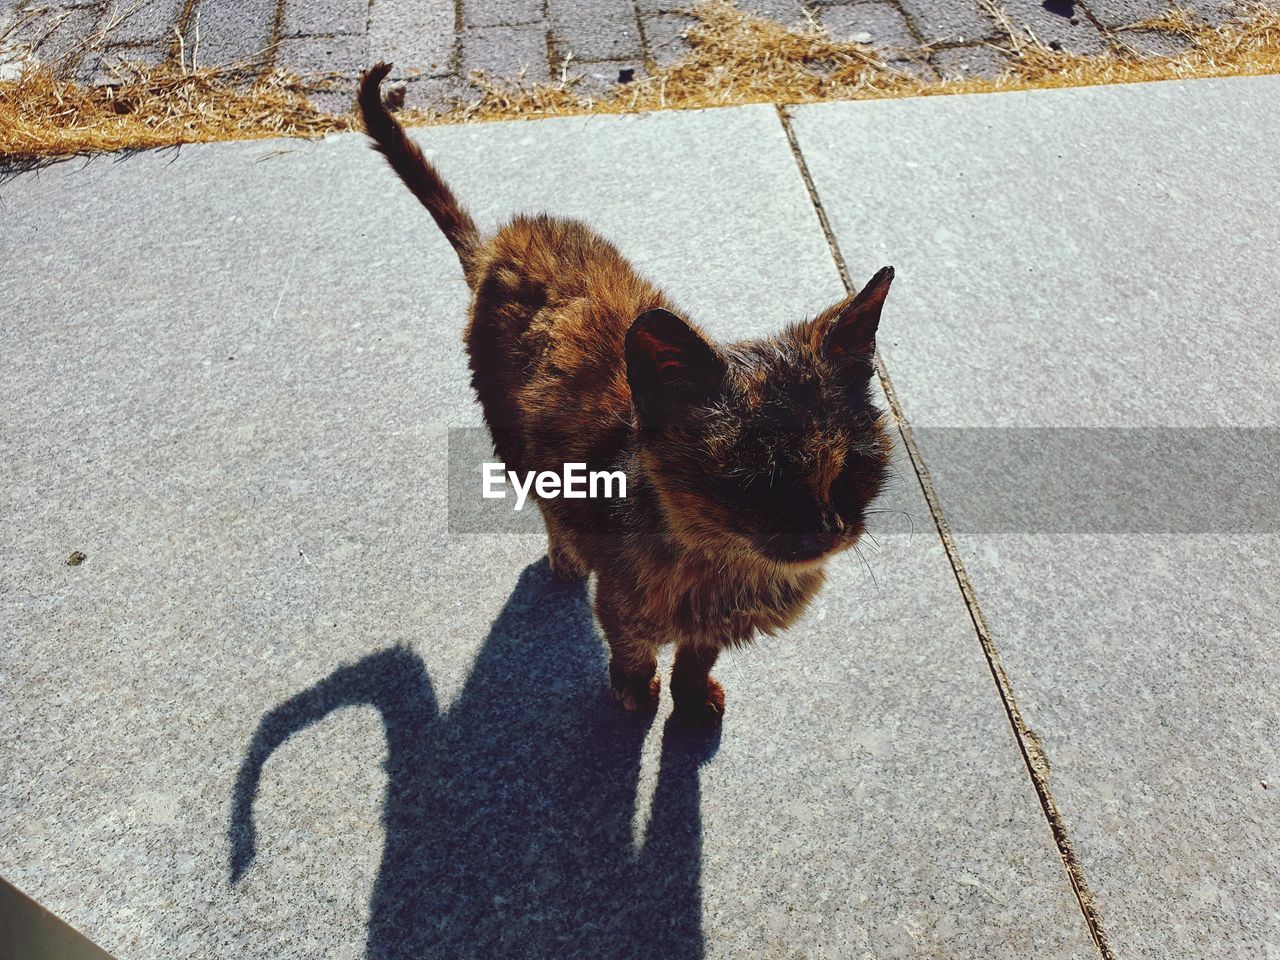 high angle view of cat standing on street